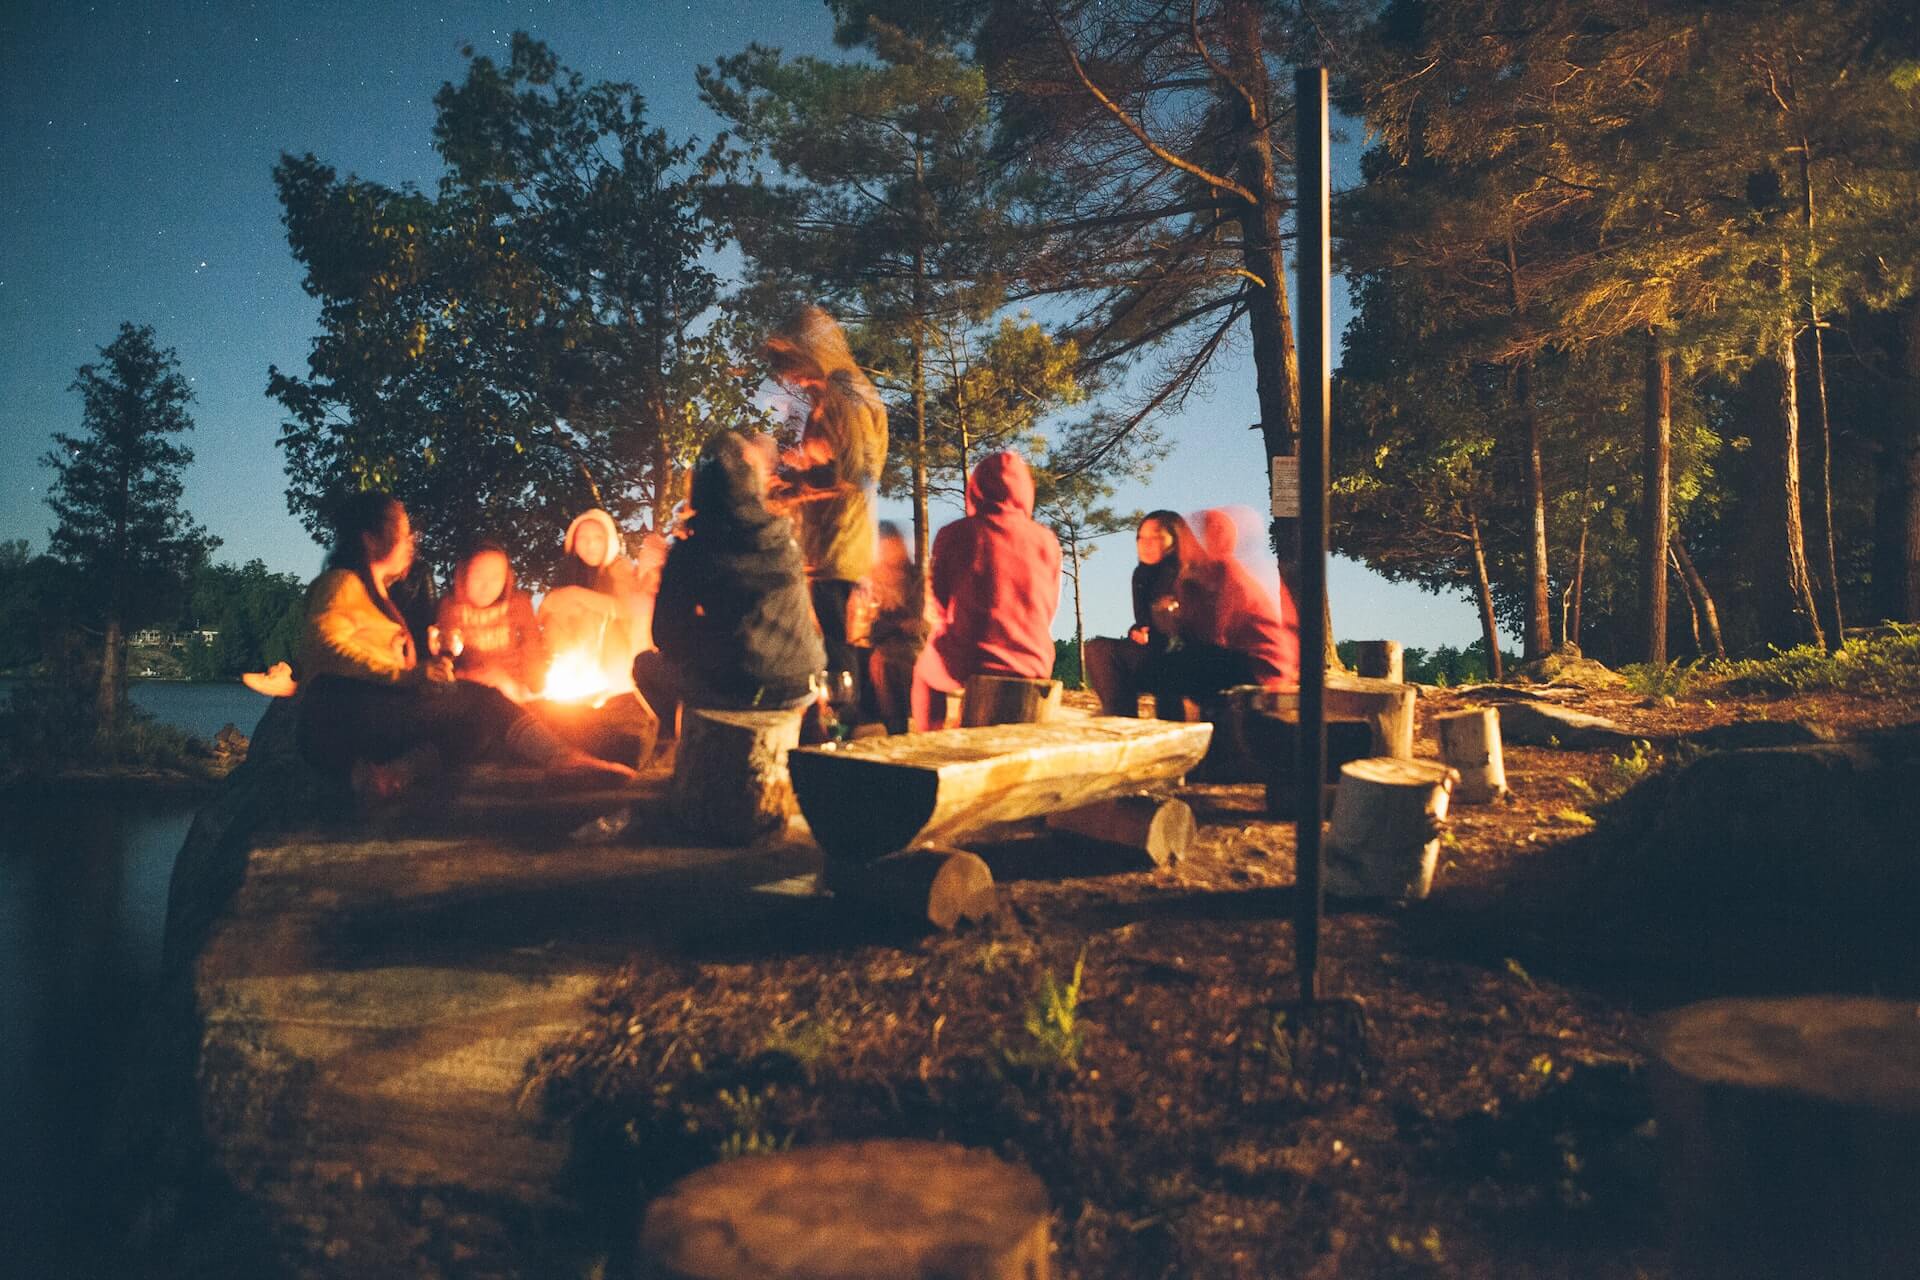 People sitting by a campfire